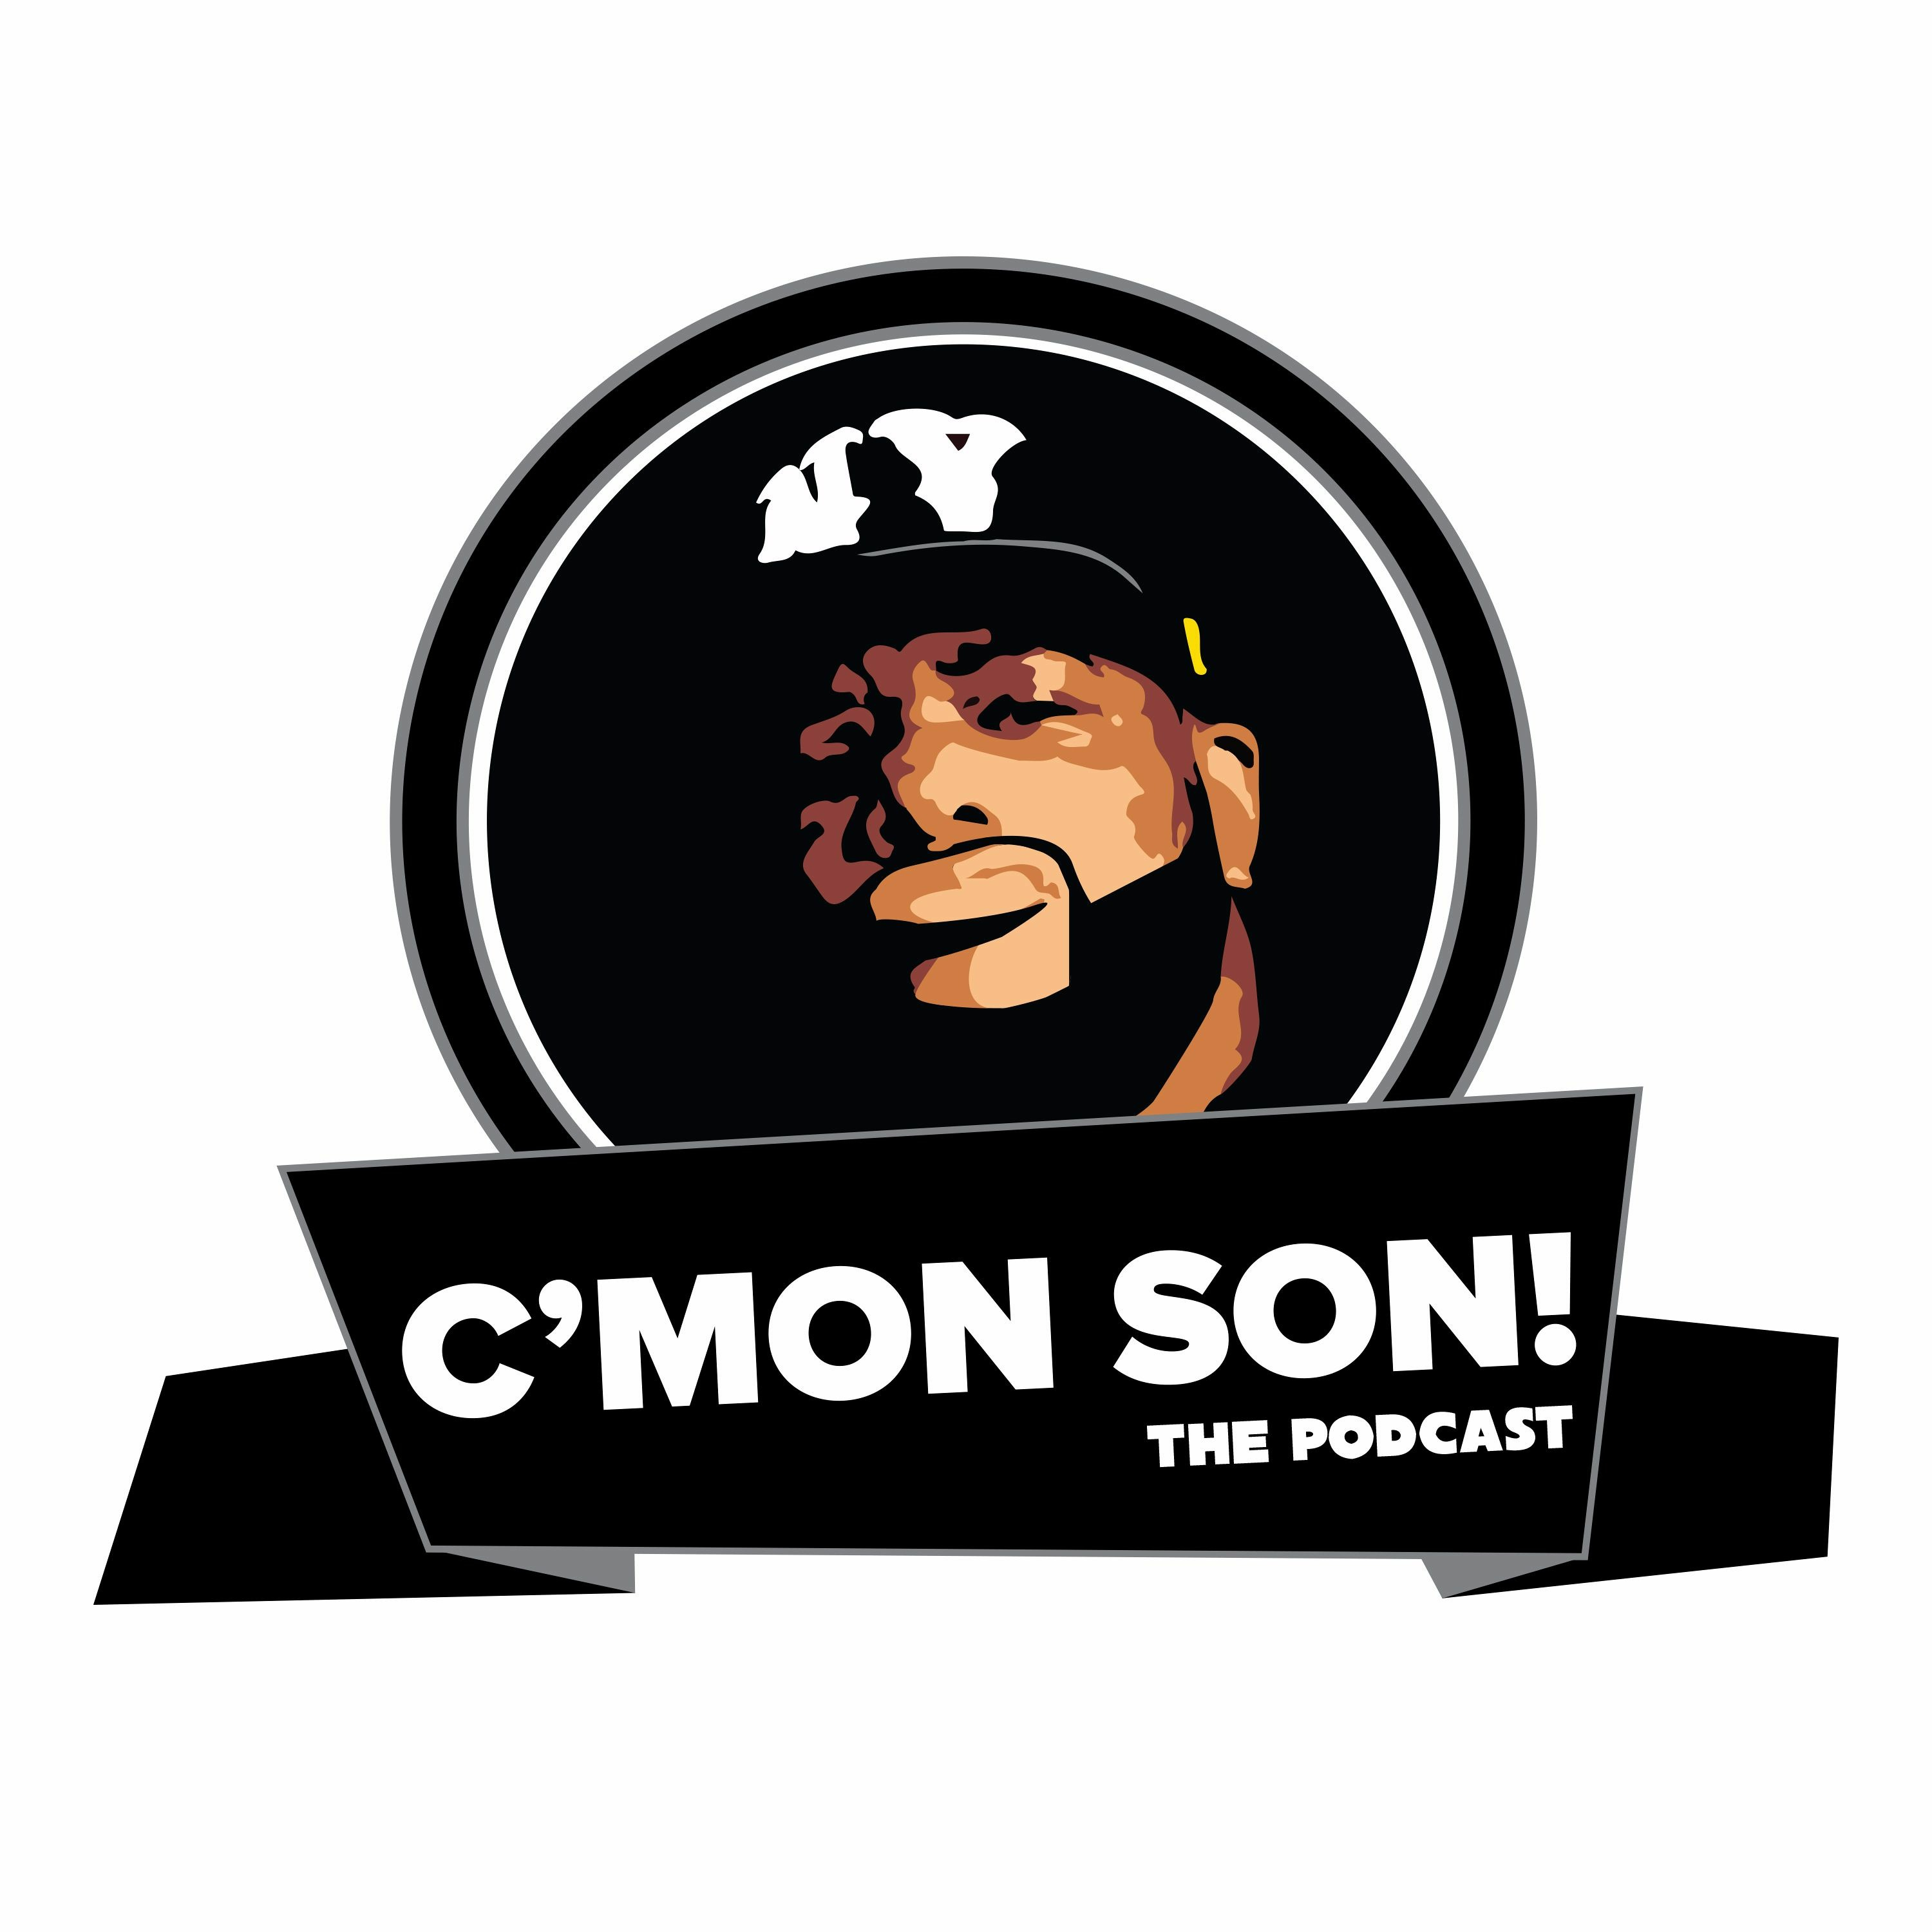 C'Mon Son! The Podcast Series #5 Episode #51: Cyhi The Prynce